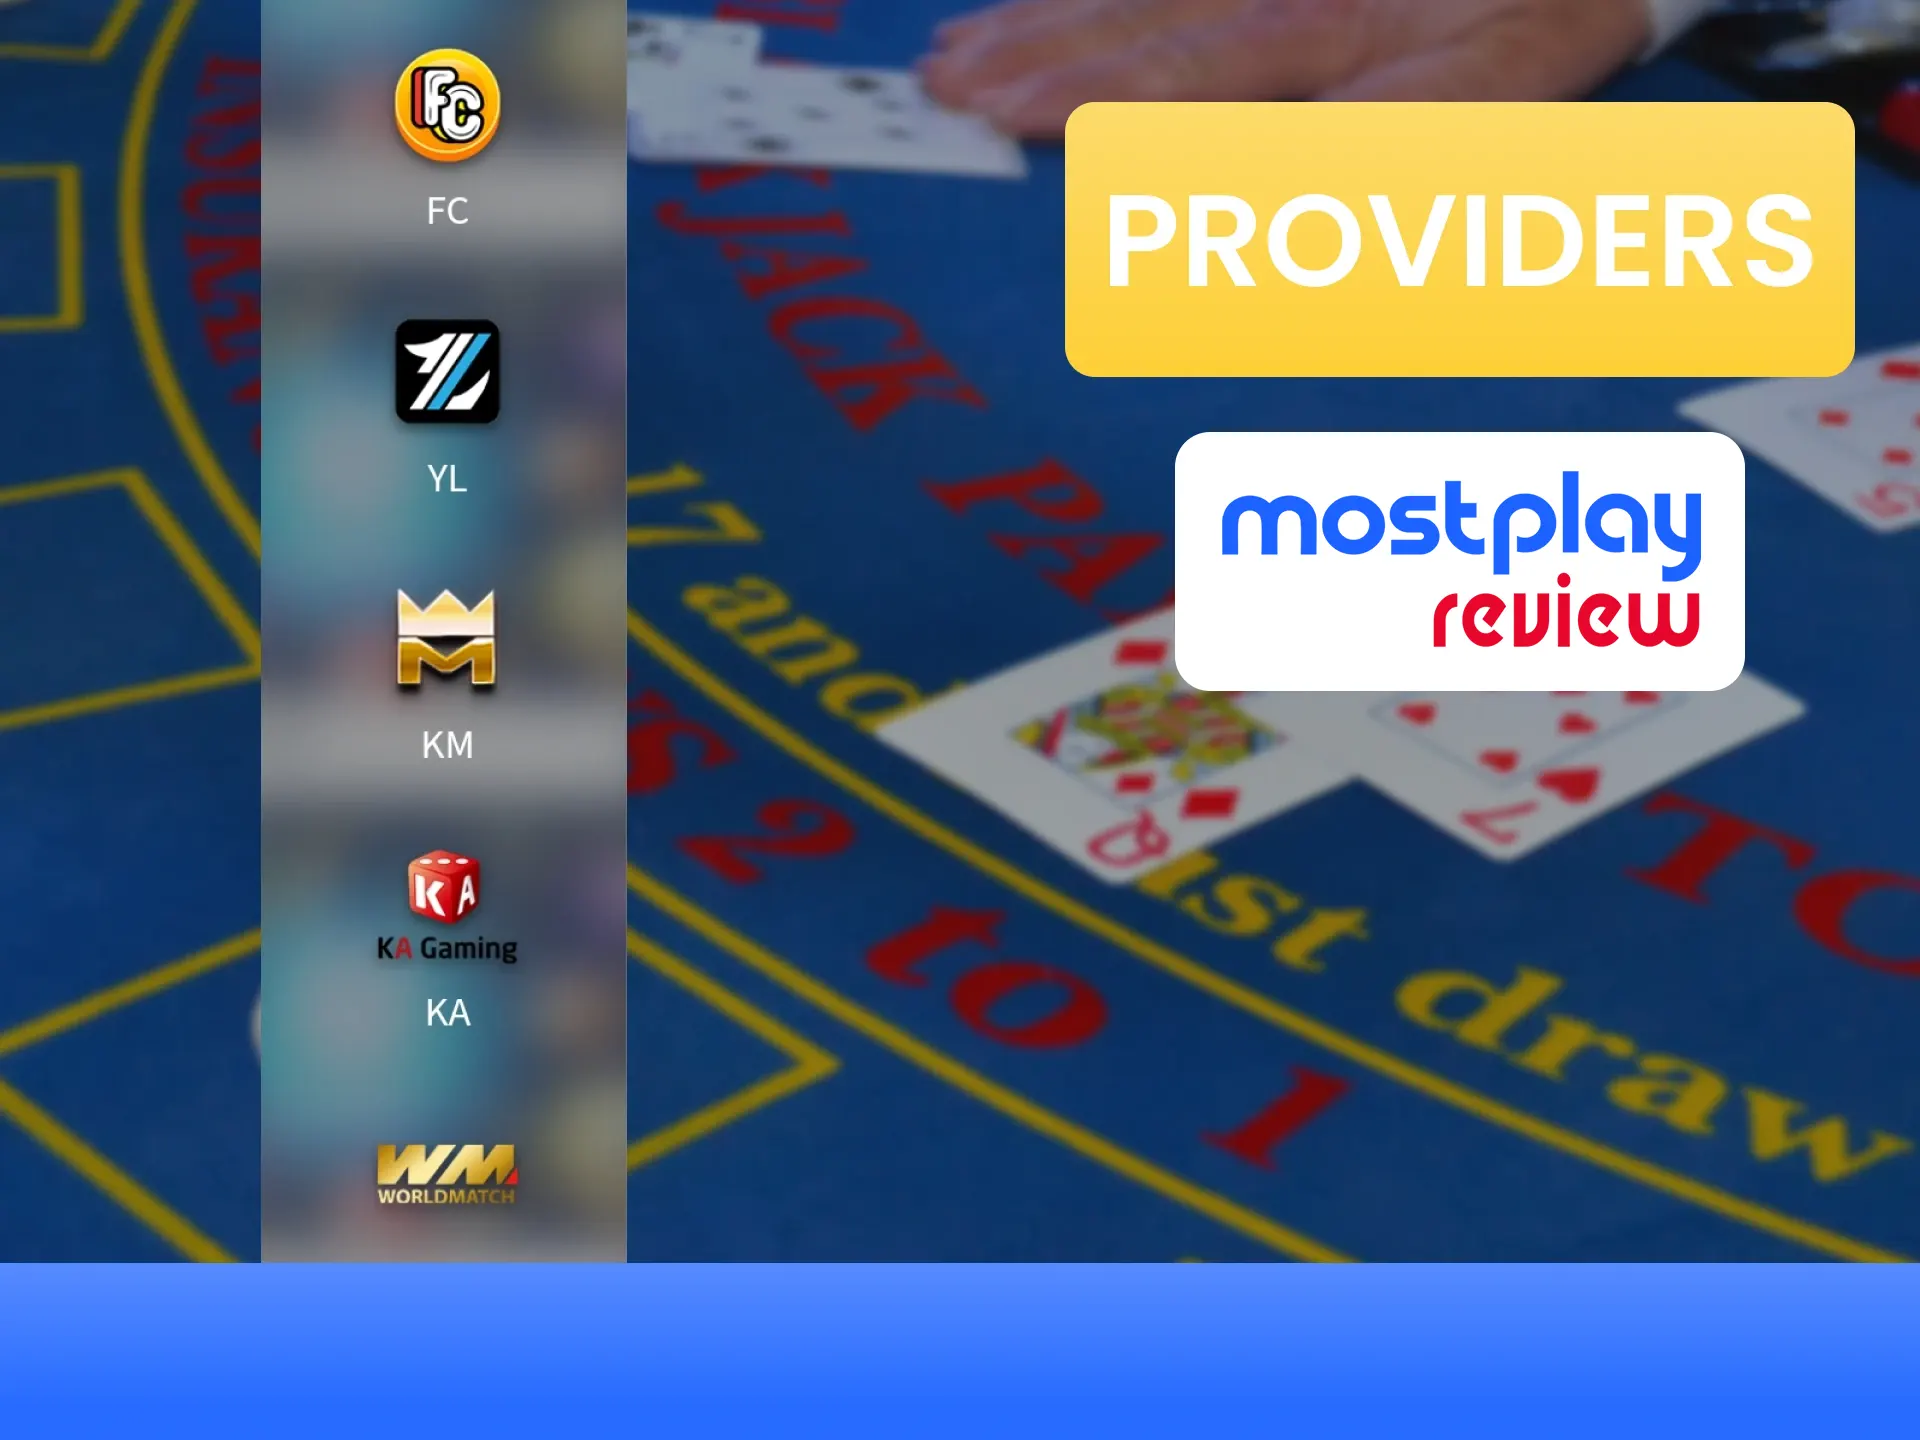 Find out which board game providers are available on Mostplay.